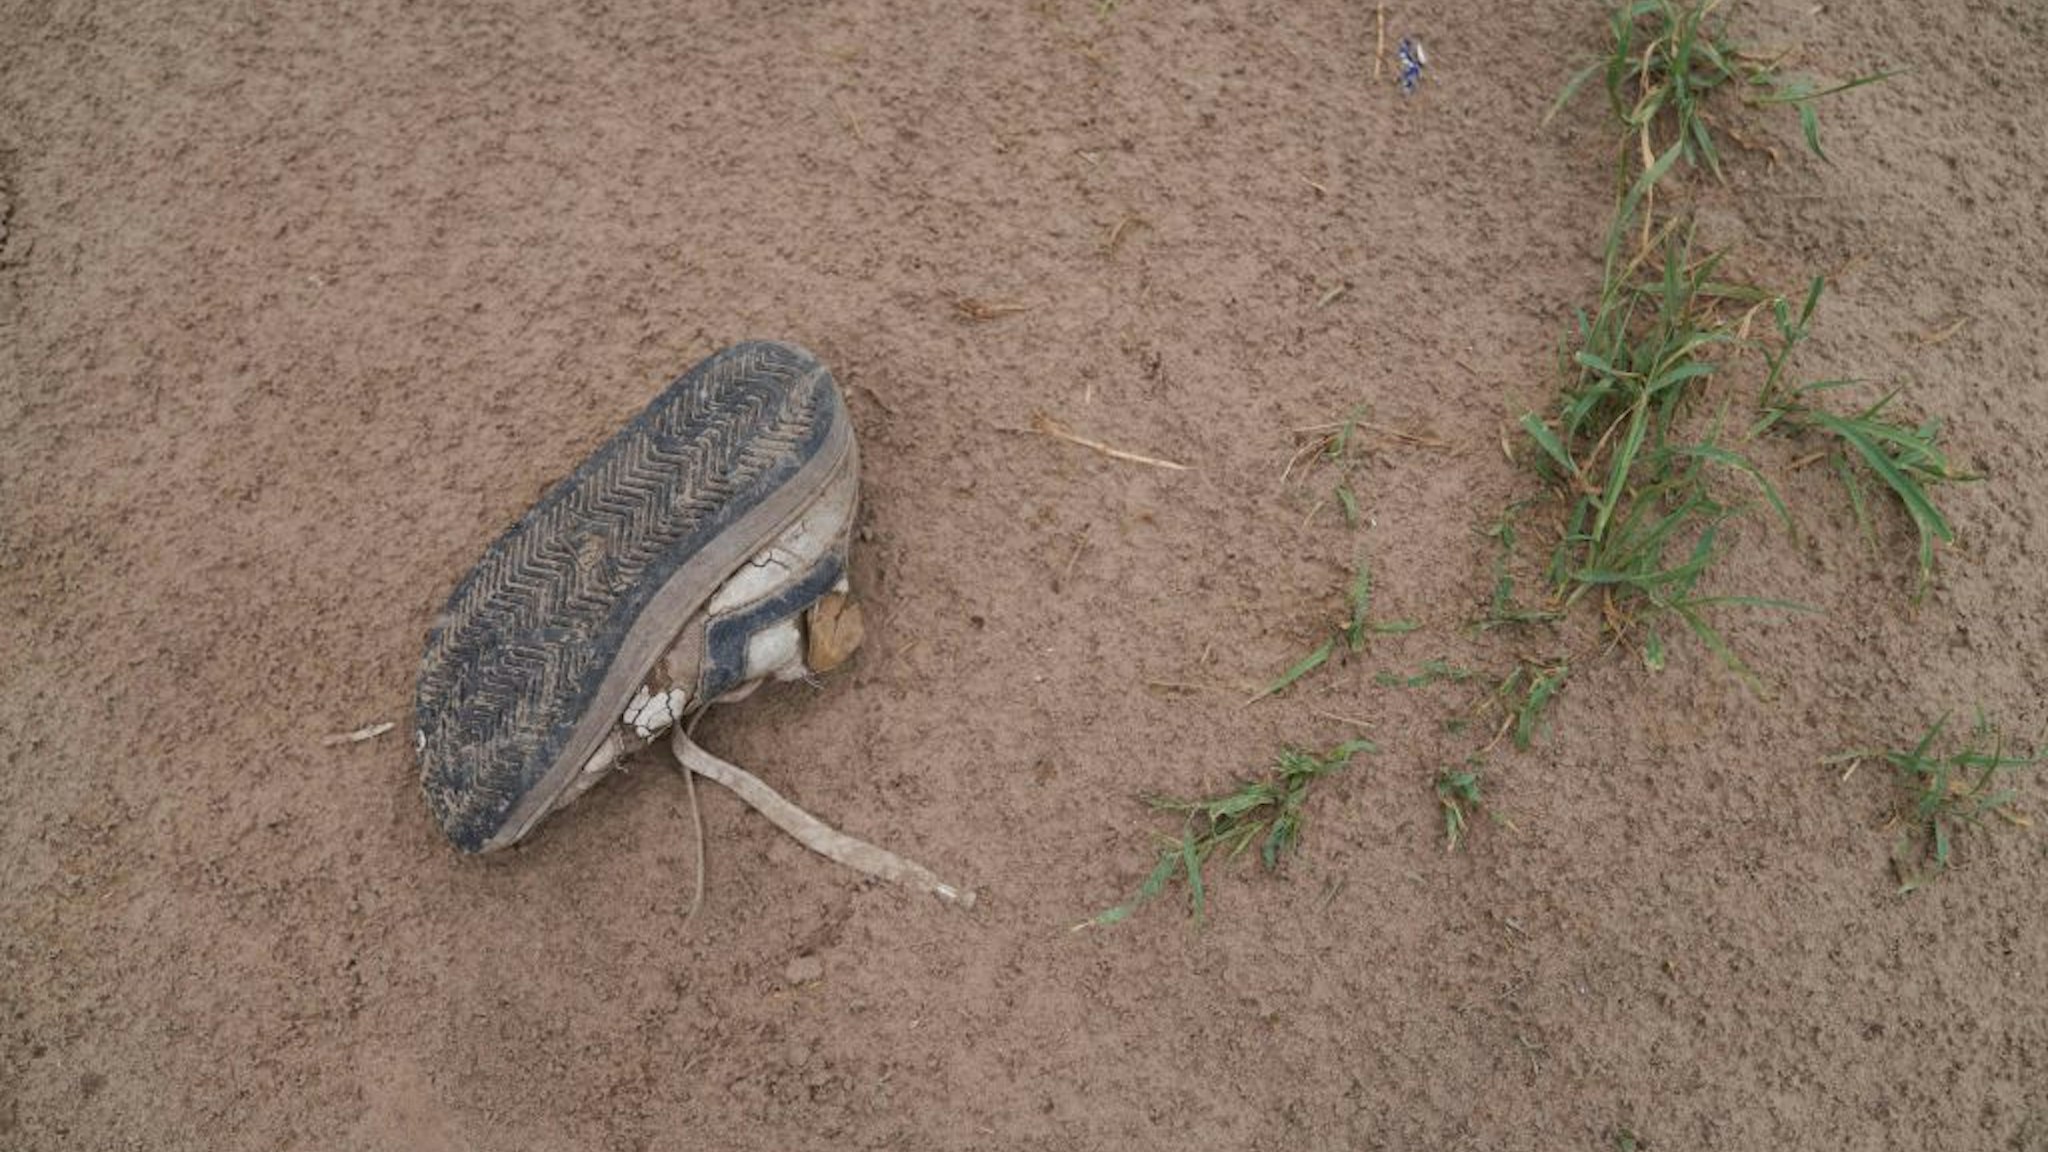 A shoe left behind by a migrant is seen along the Rio Grande River in Eagle Pass, Texas, on May 22, 2022.